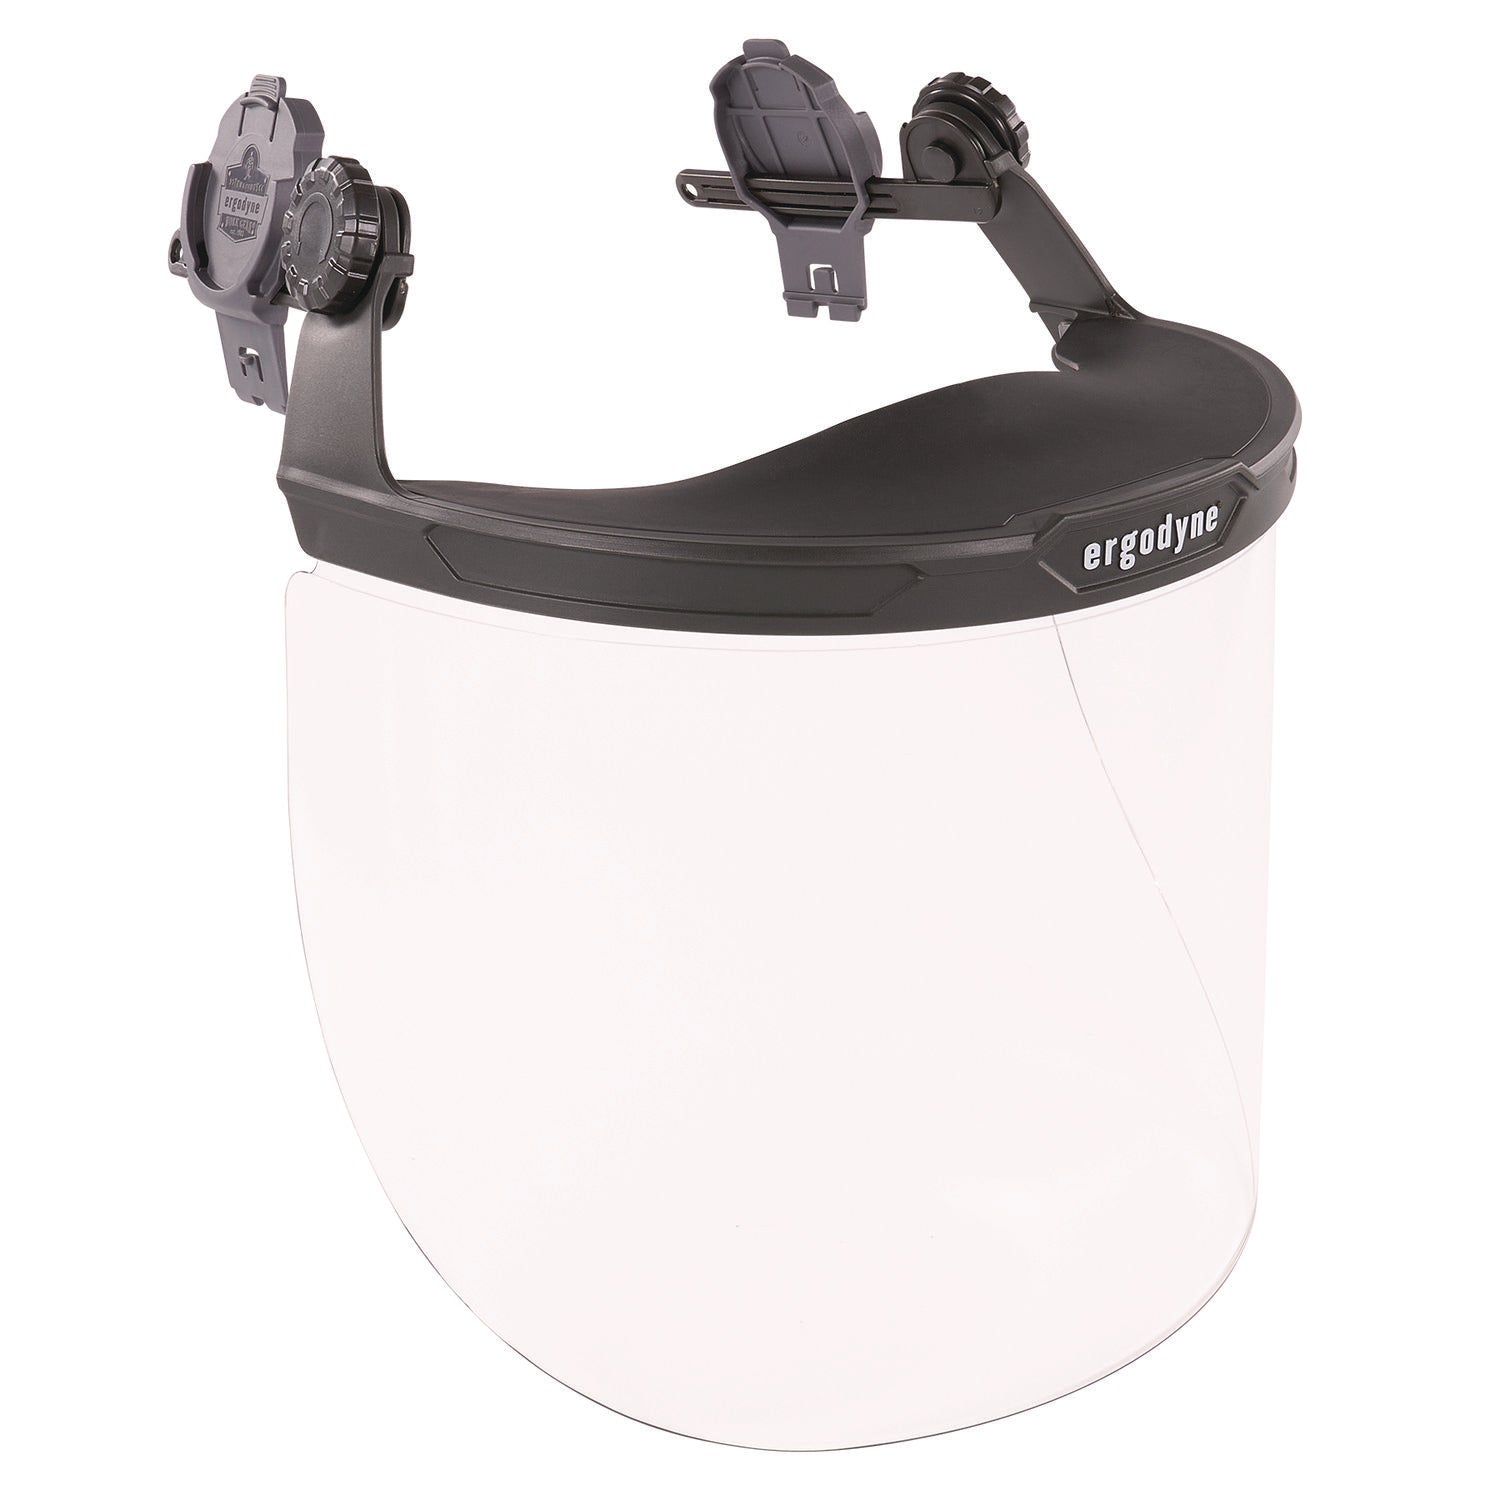 skullerz-8995-anti-scratch-and-anti-fog-hard-hat-face-shield-with-adapter-for-full-brim-clear-lens-ships-in-1-3-bus-days_ego60245 - 1